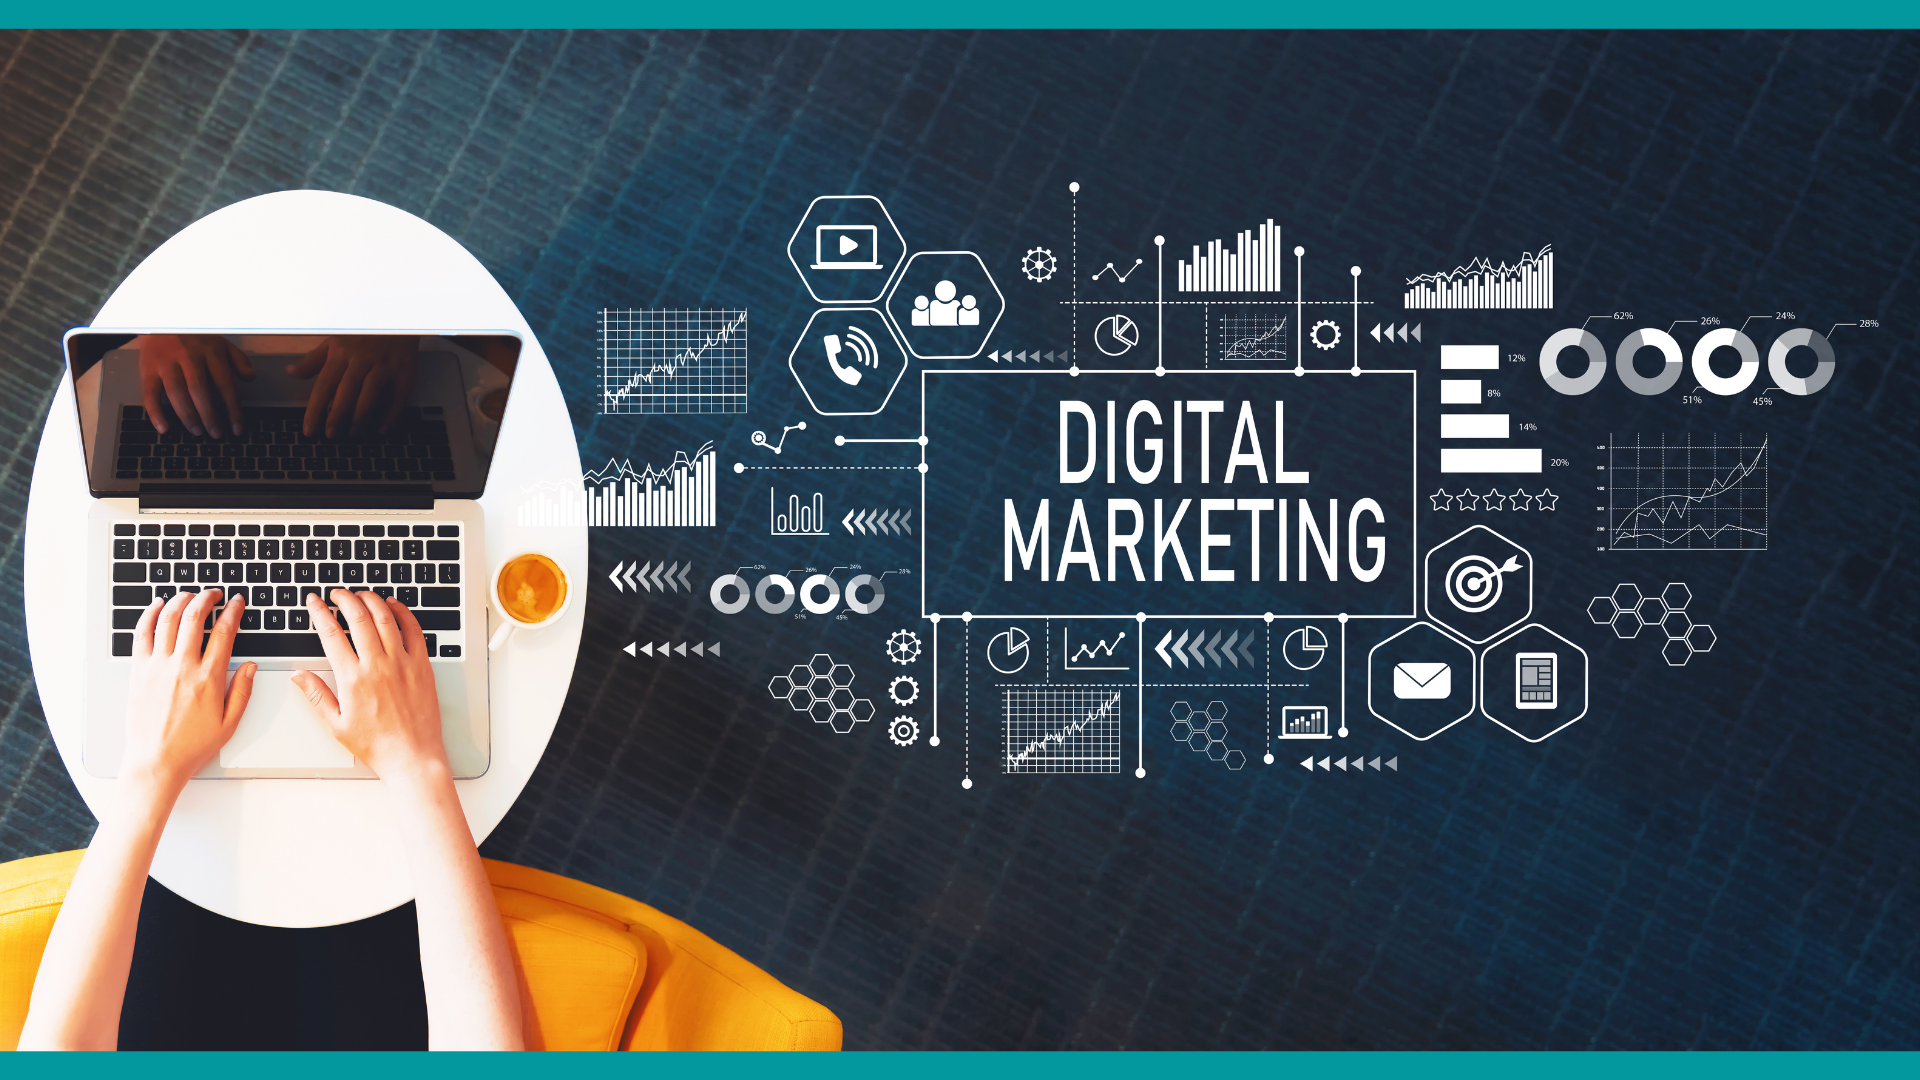 What can integrated digital marketing do for eLearning